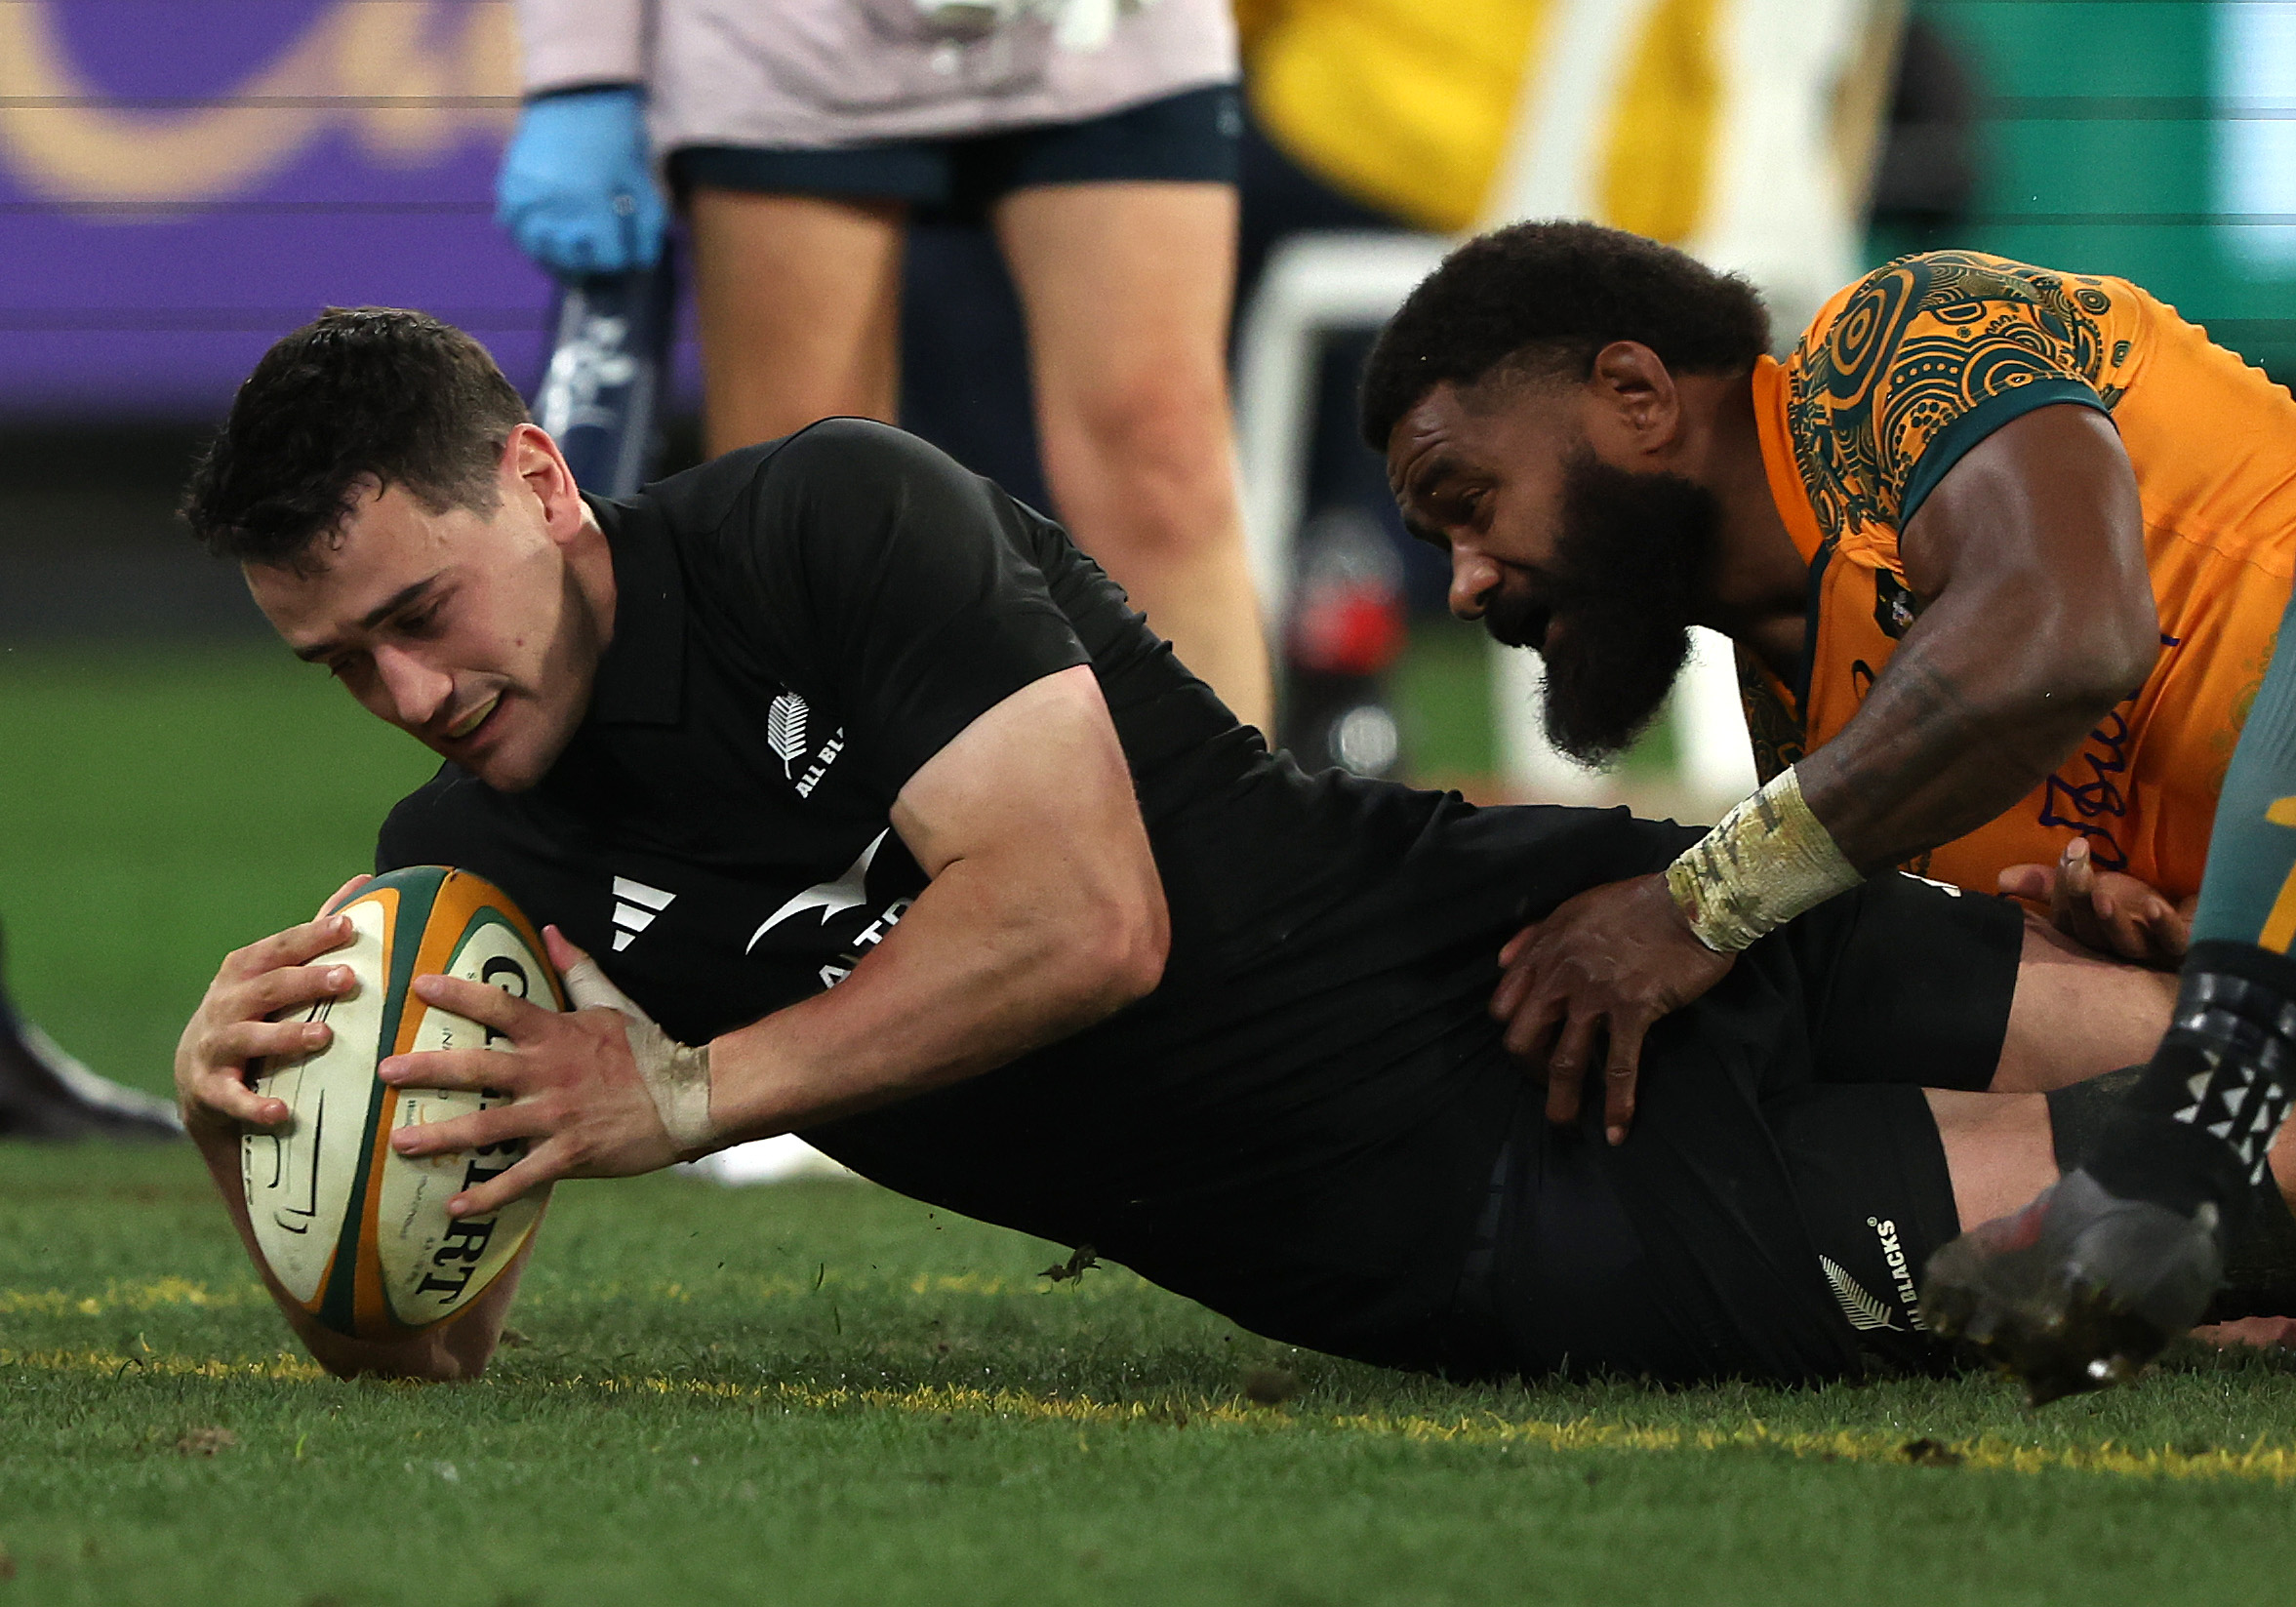 All Blacks v Wallabies Bledisloe Cup test All you need to know - kickoff time, how to watch in NZ, live streaming, teams, odds